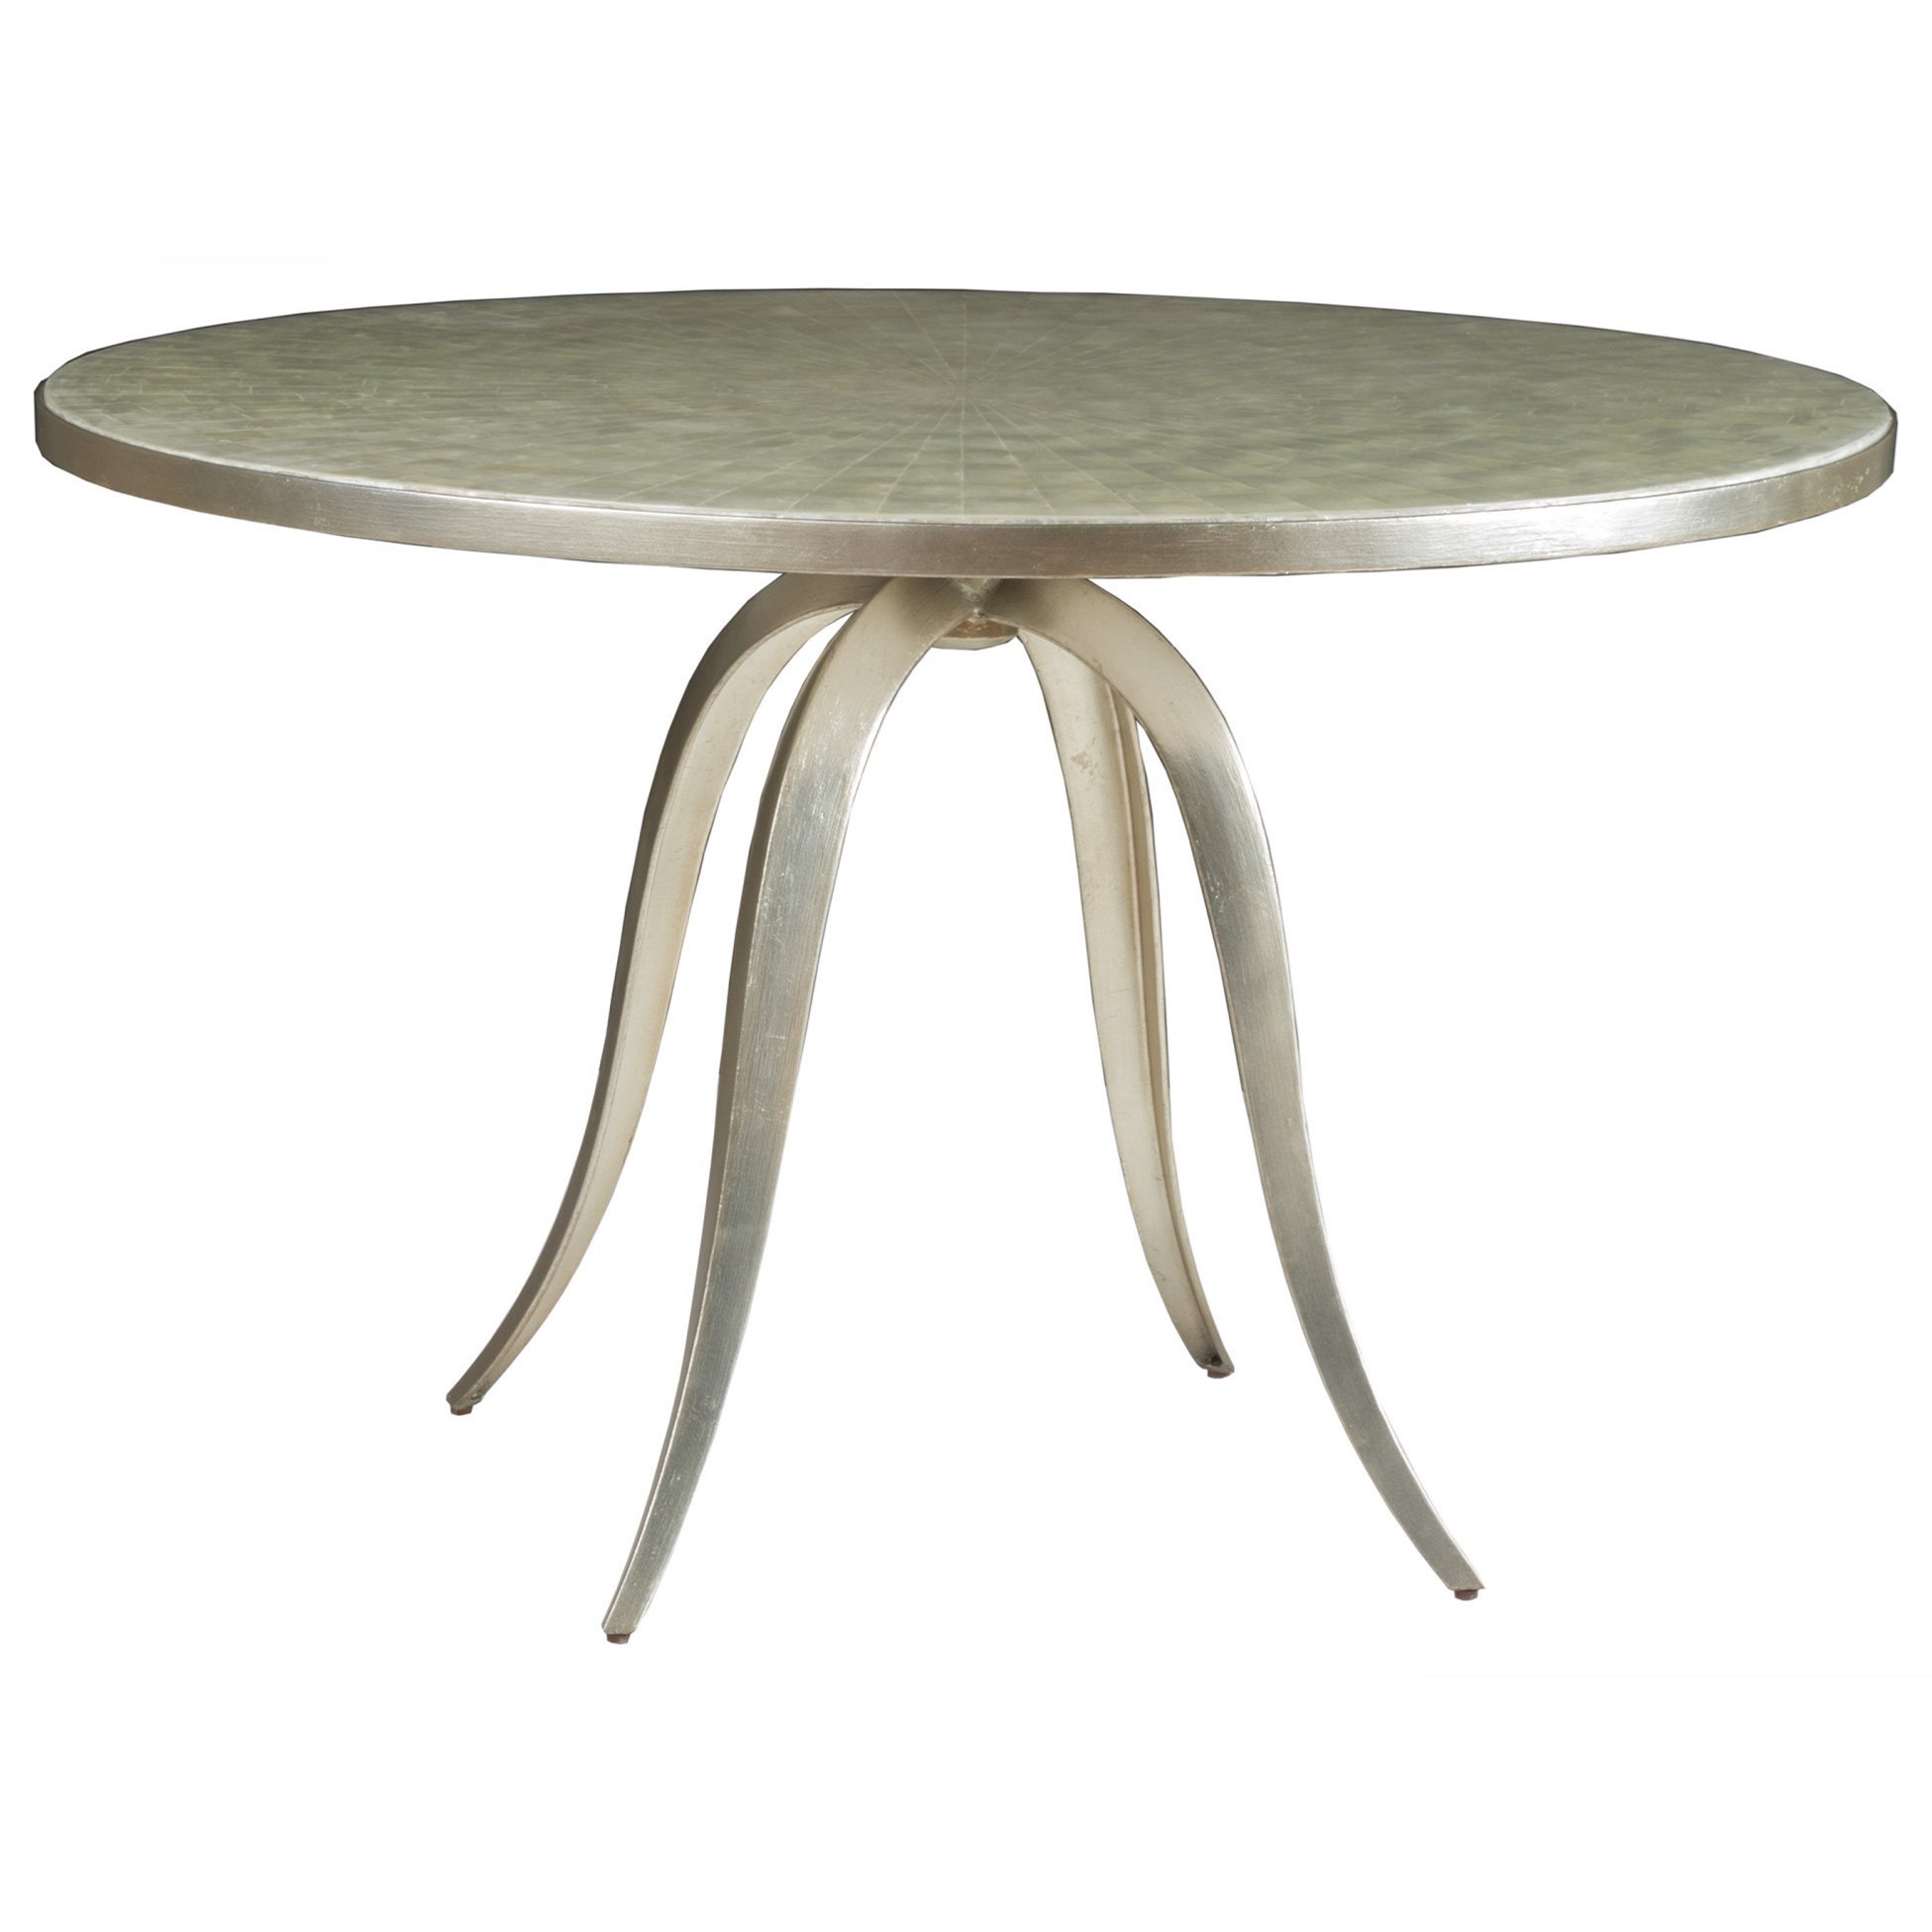 Transitional Round Dining Table with Capiz Shell Top